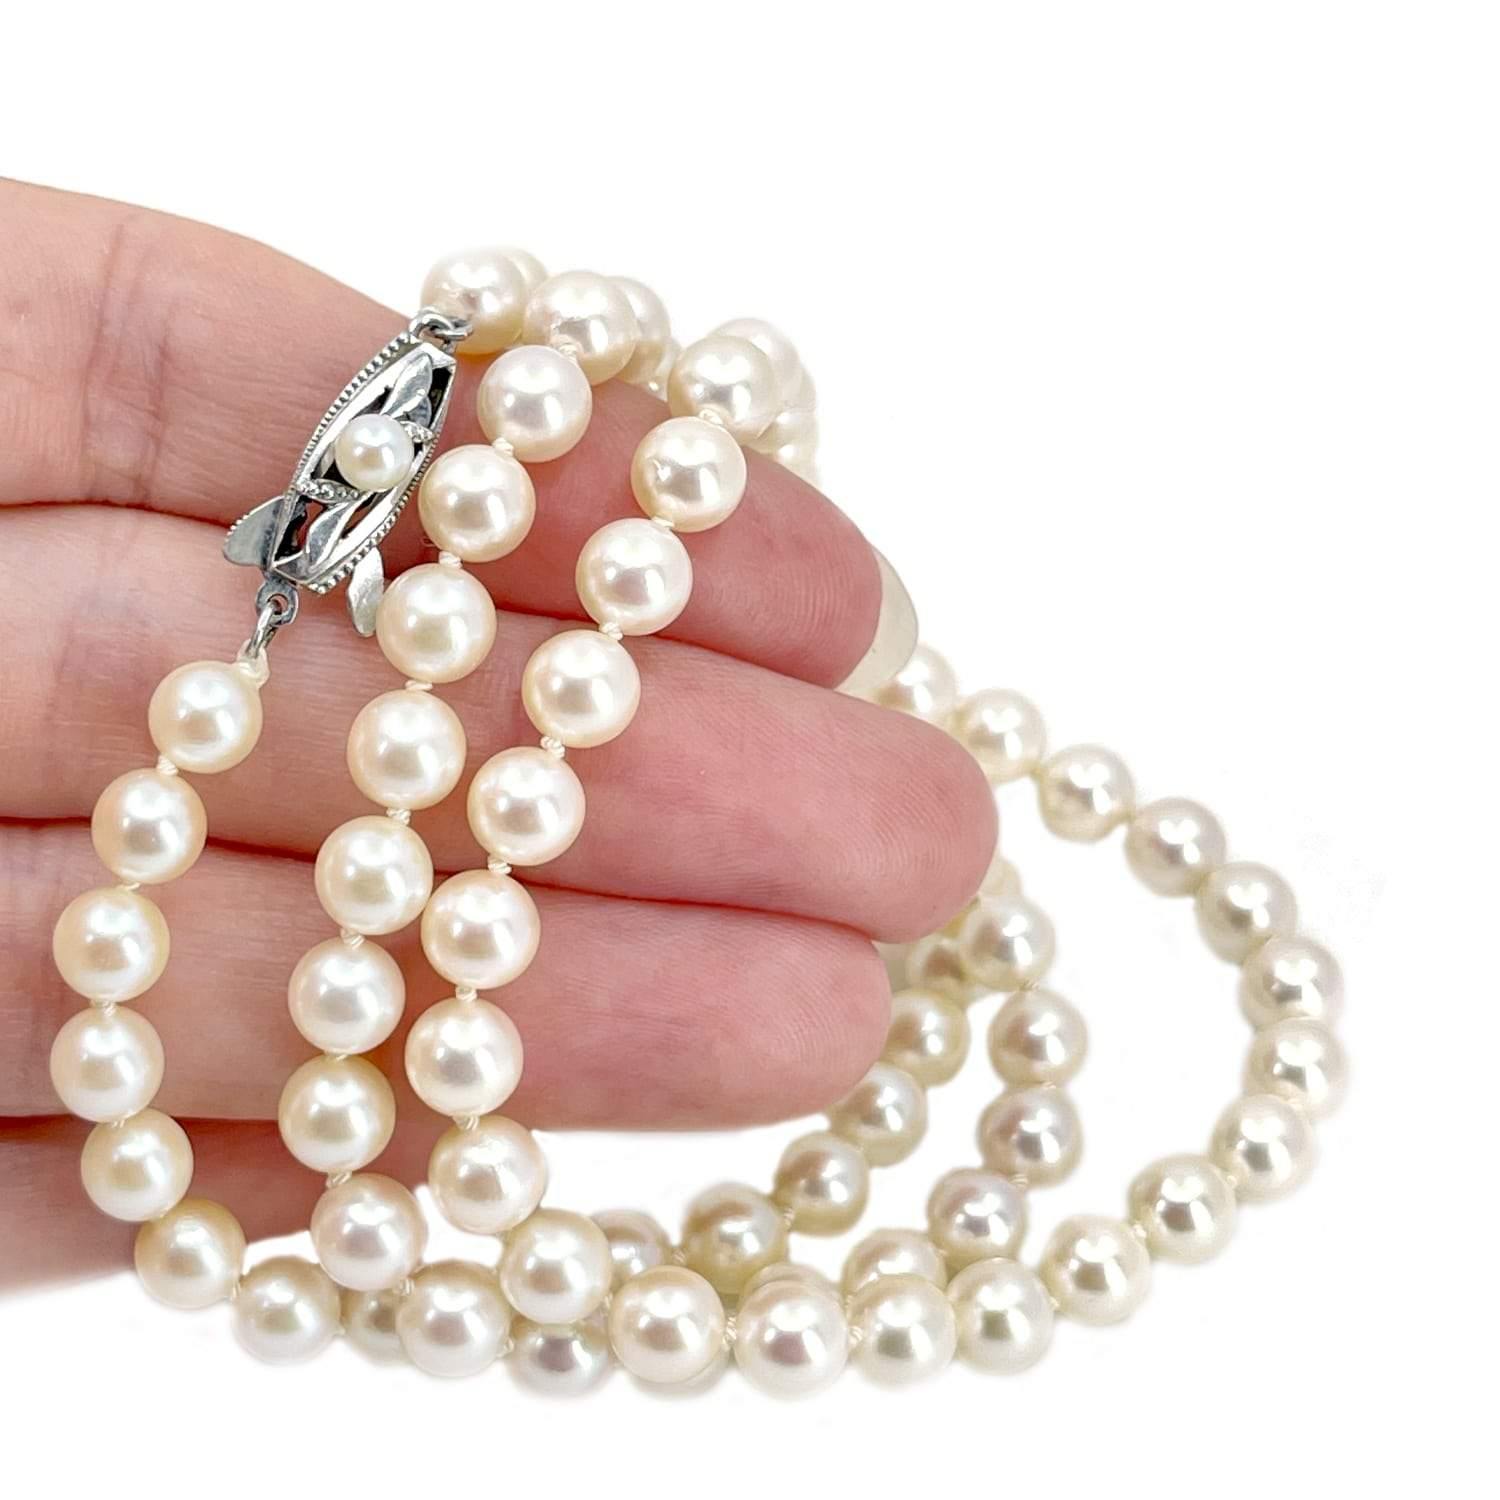 Mikimoto Japanese Cultured Akoya Pearl Beaded Strand - Sterling Silver 24 Inch